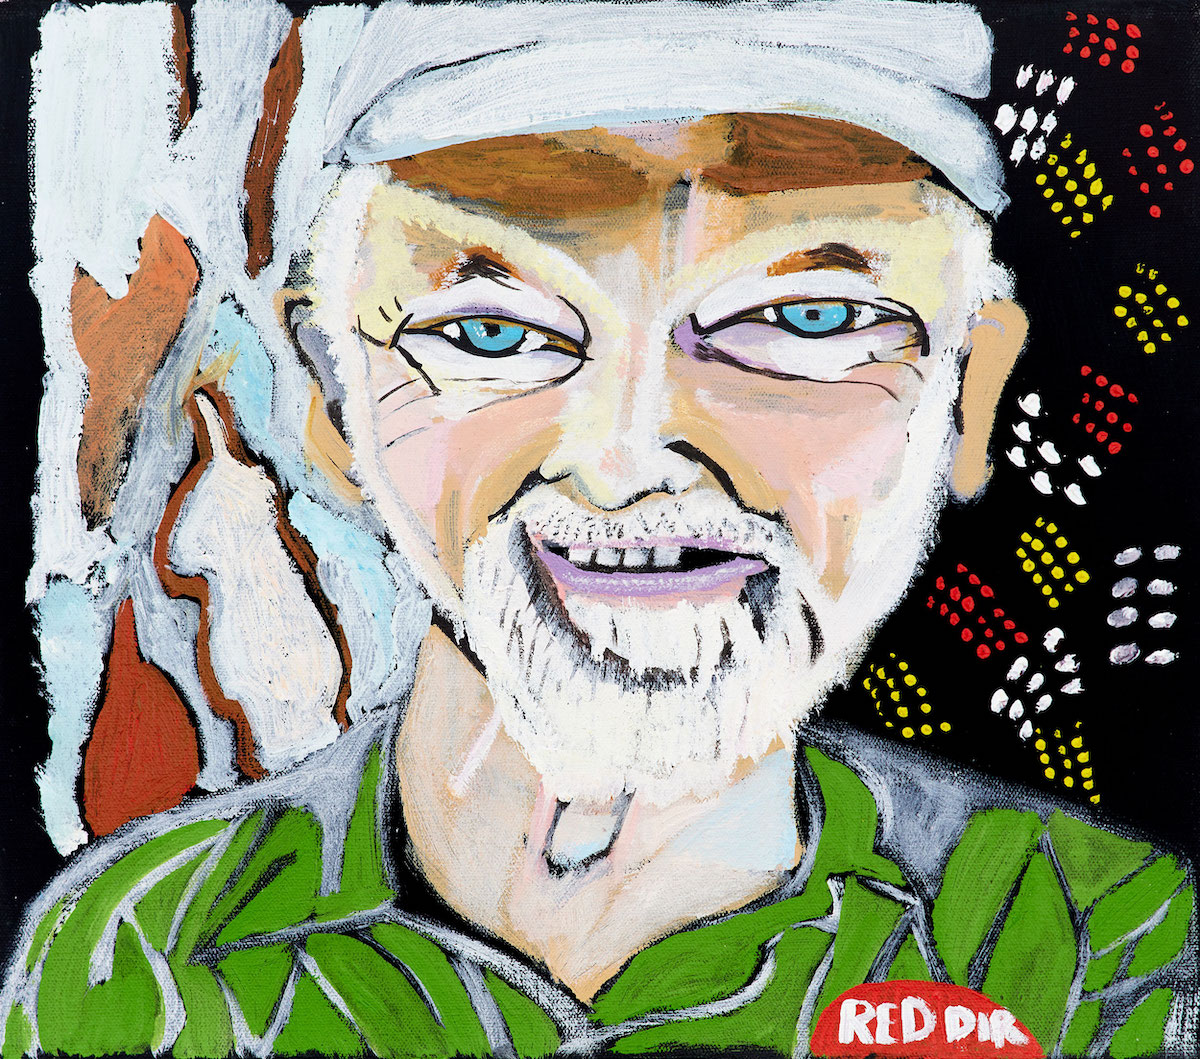 Portrait of a bearded person wearing a cap and a green striped shirt with a red sticker saying 'Red Dir' against an abstract, multicoloured background